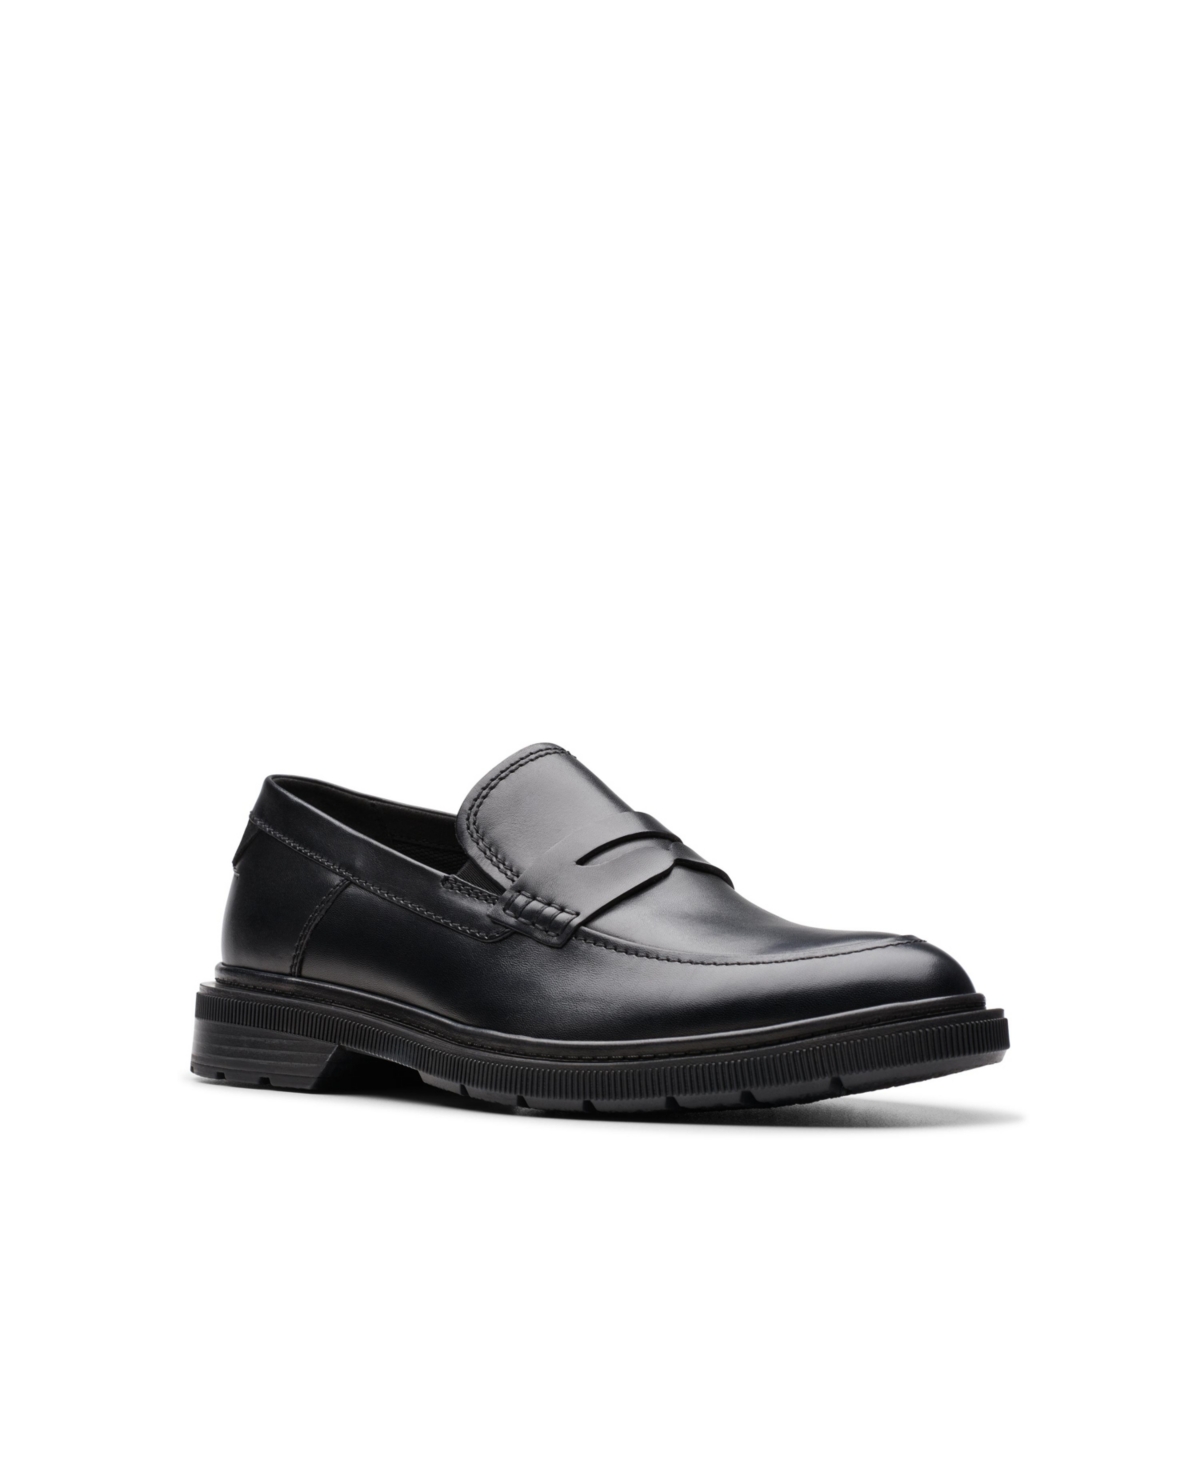 Men's Collection Burchill Penny Slip On Loafers - Black Leather